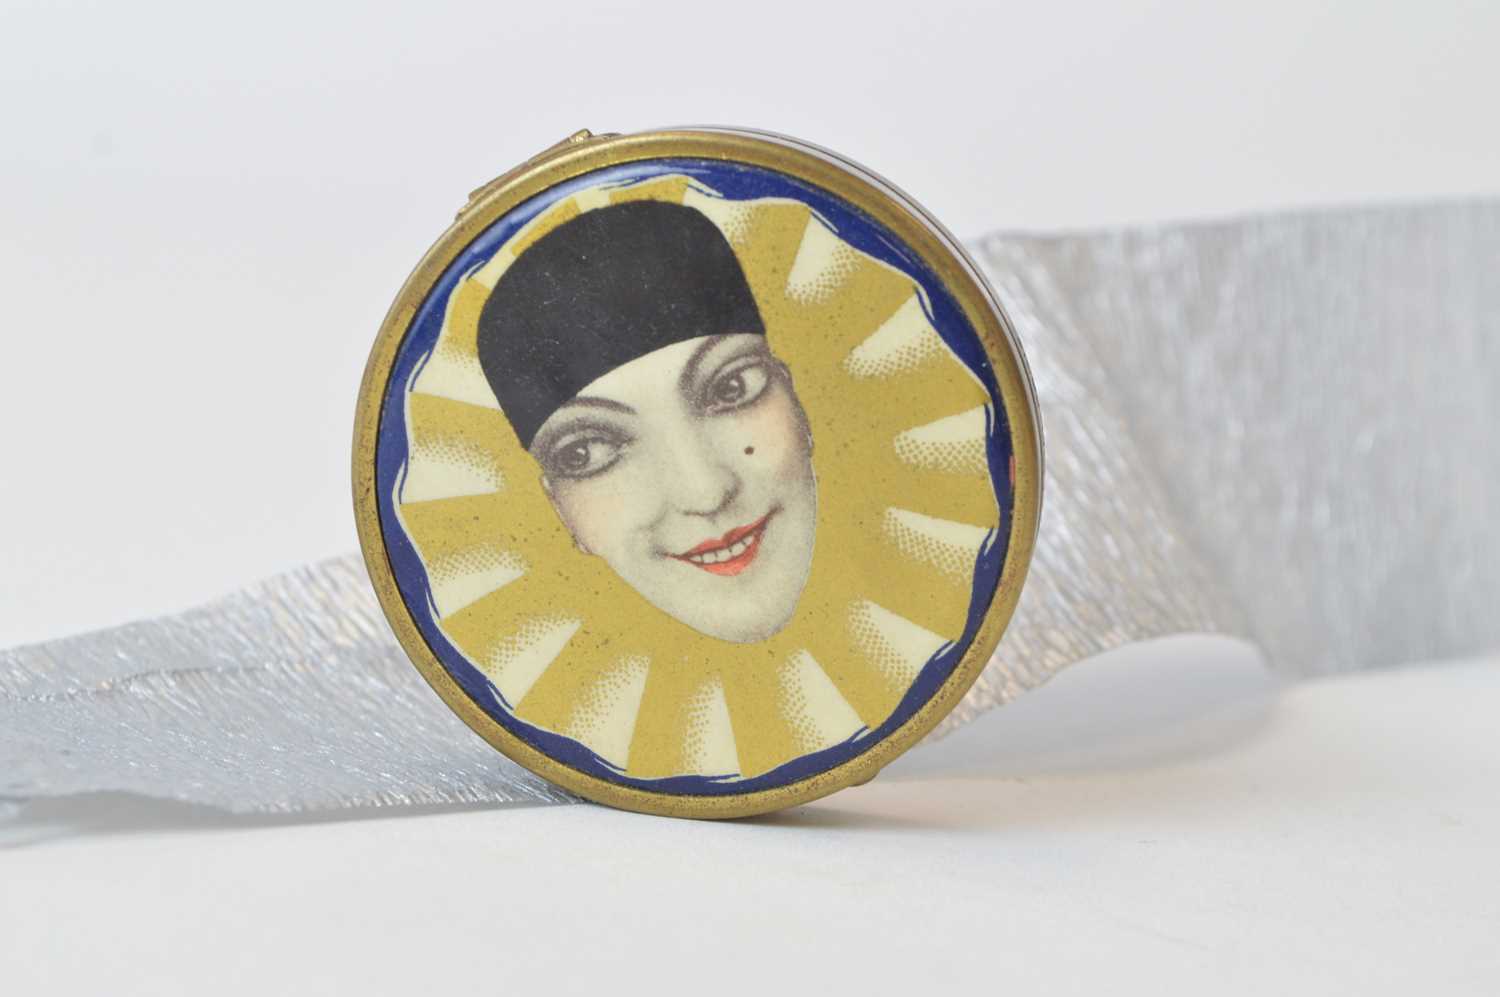 Lot 34 - A 1920s rare Tokalon loose powder compact depicting pantomime character Pierrot